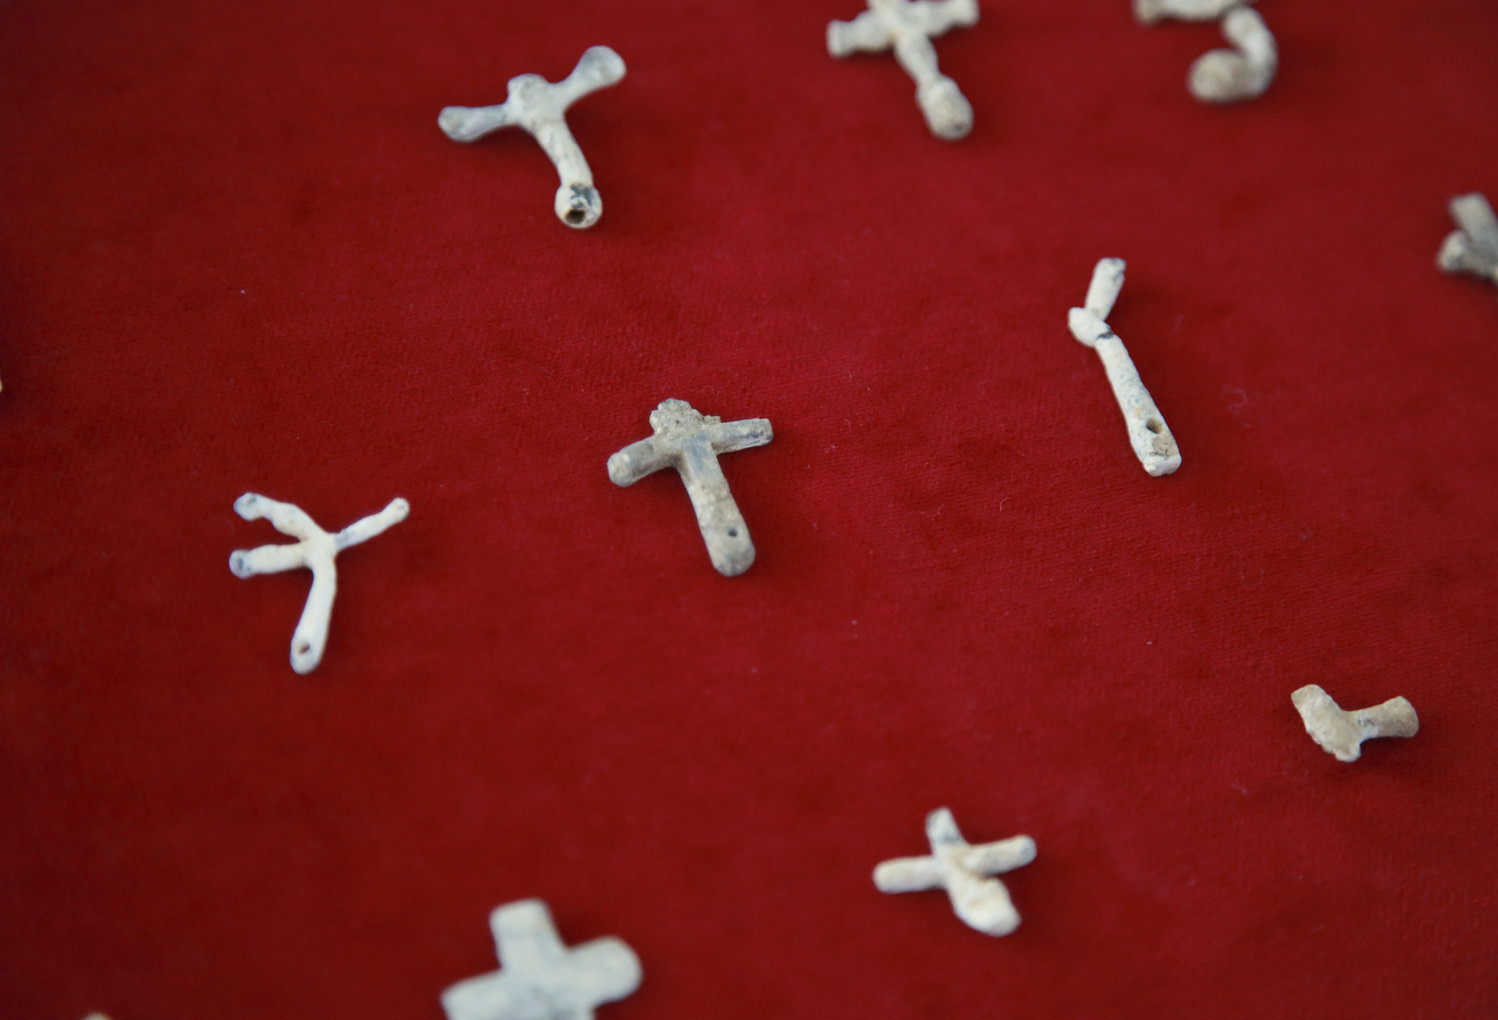 Lead crucifixes unearthed from the ruins of Hara Castle